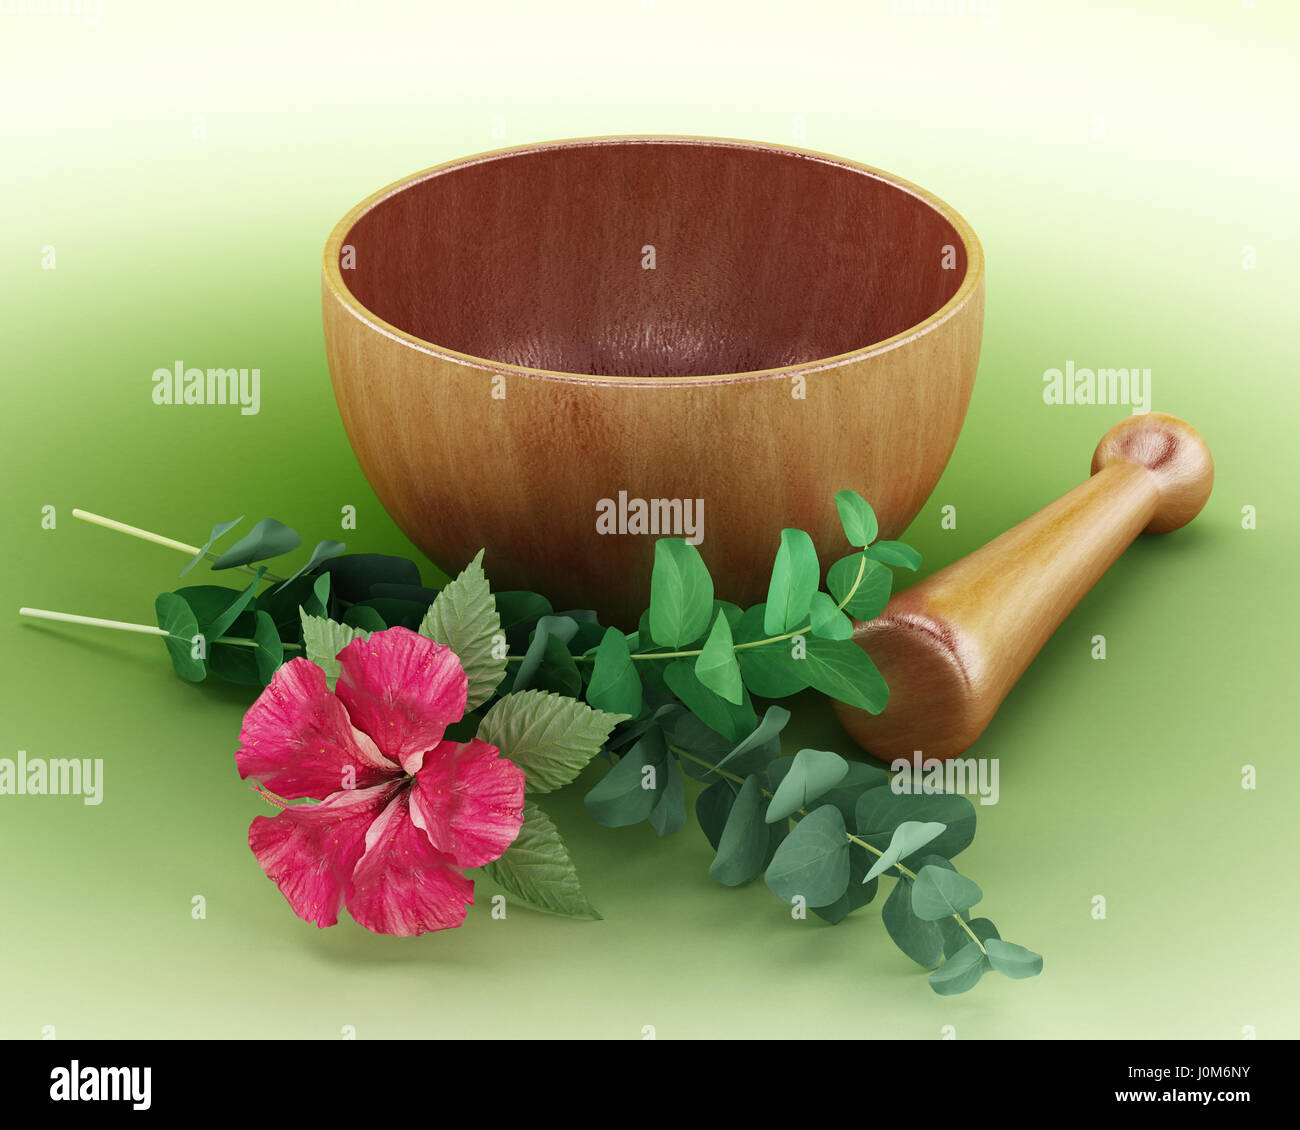 Mortar, pestle and flower isolated on green background. 3D illustration. Stock Photo